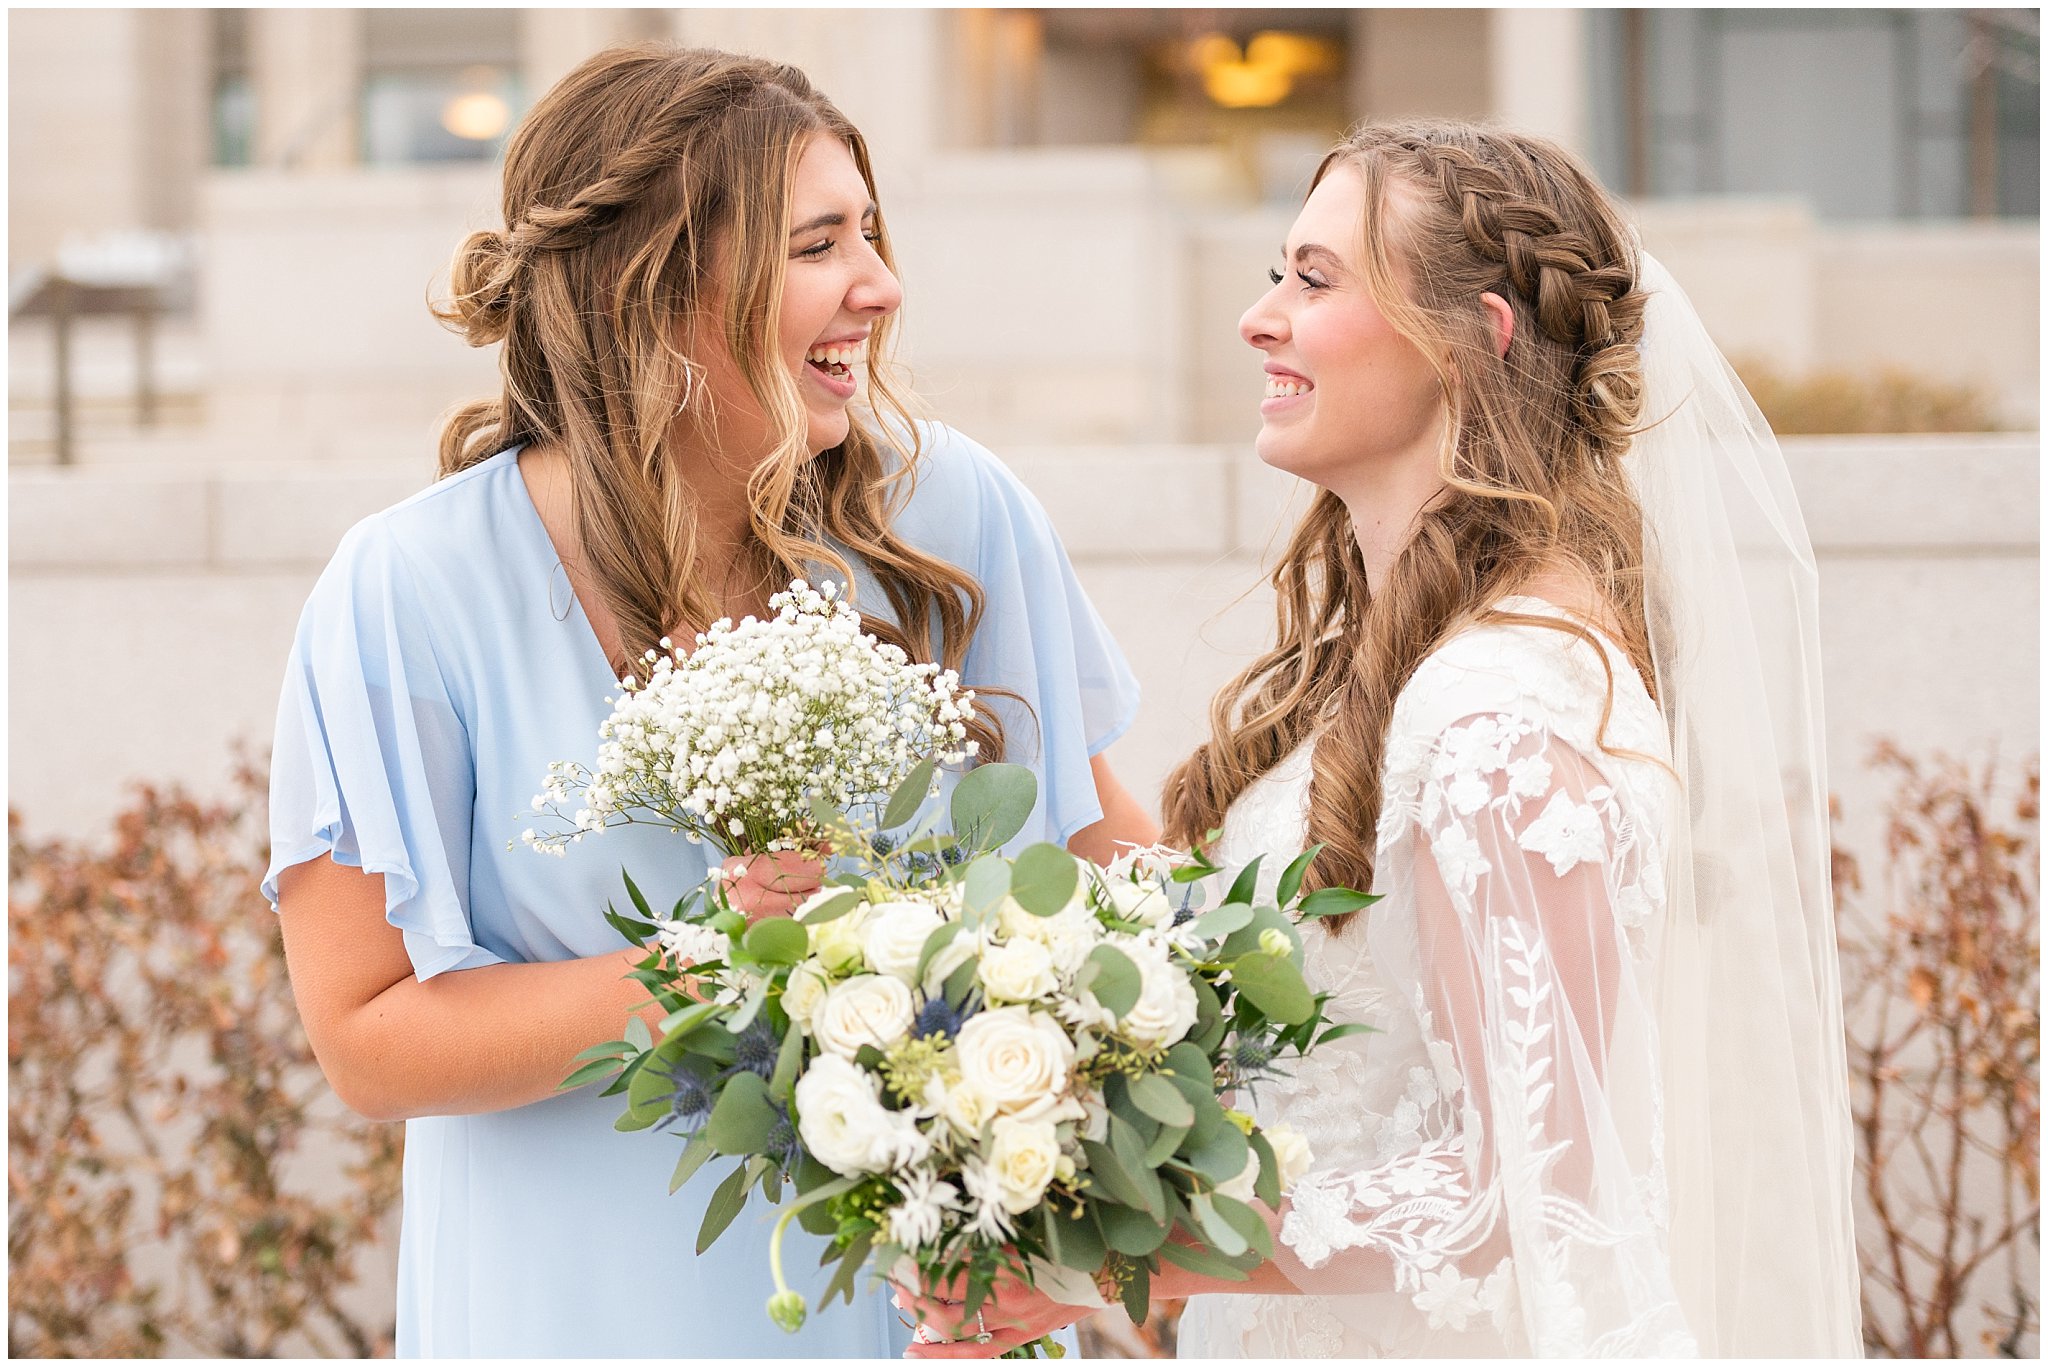 Bride with bridesmaids in light blue dresses with white bouquets | Oquirrh Mountain Temple and Draper Day Barn Winter Wedding | Jessie and Dallin Photography